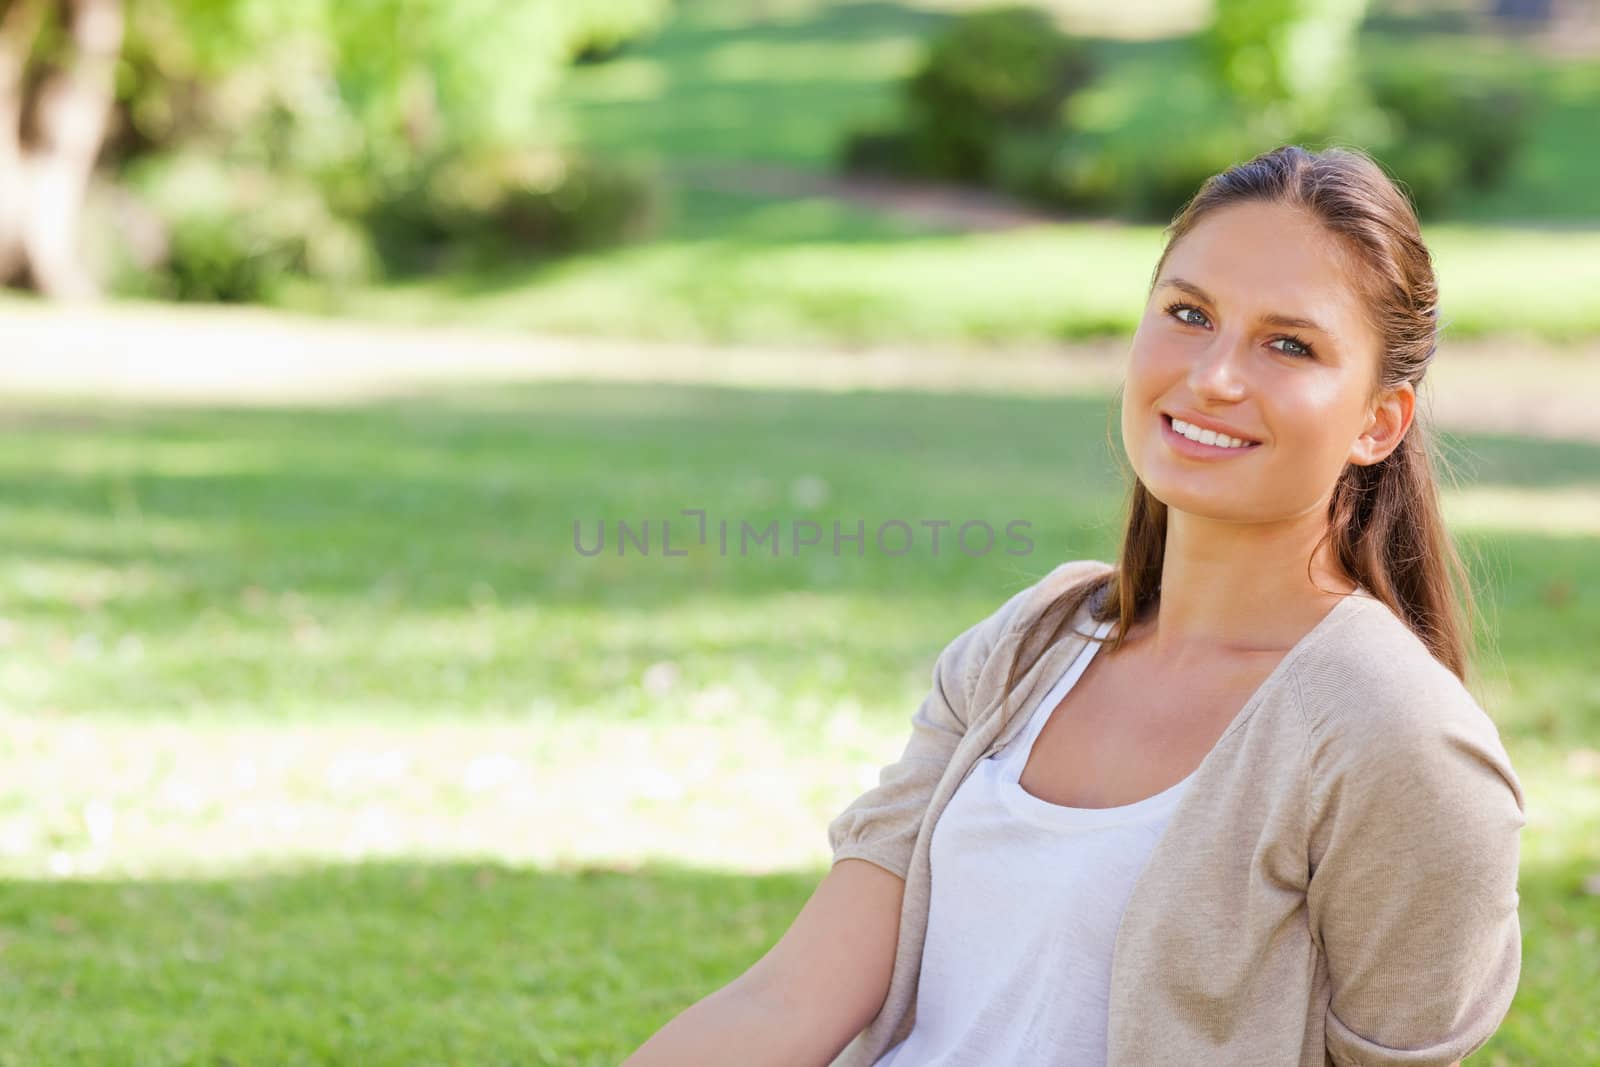 Smiling woman enjoying her day in the park by Wavebreakmedia